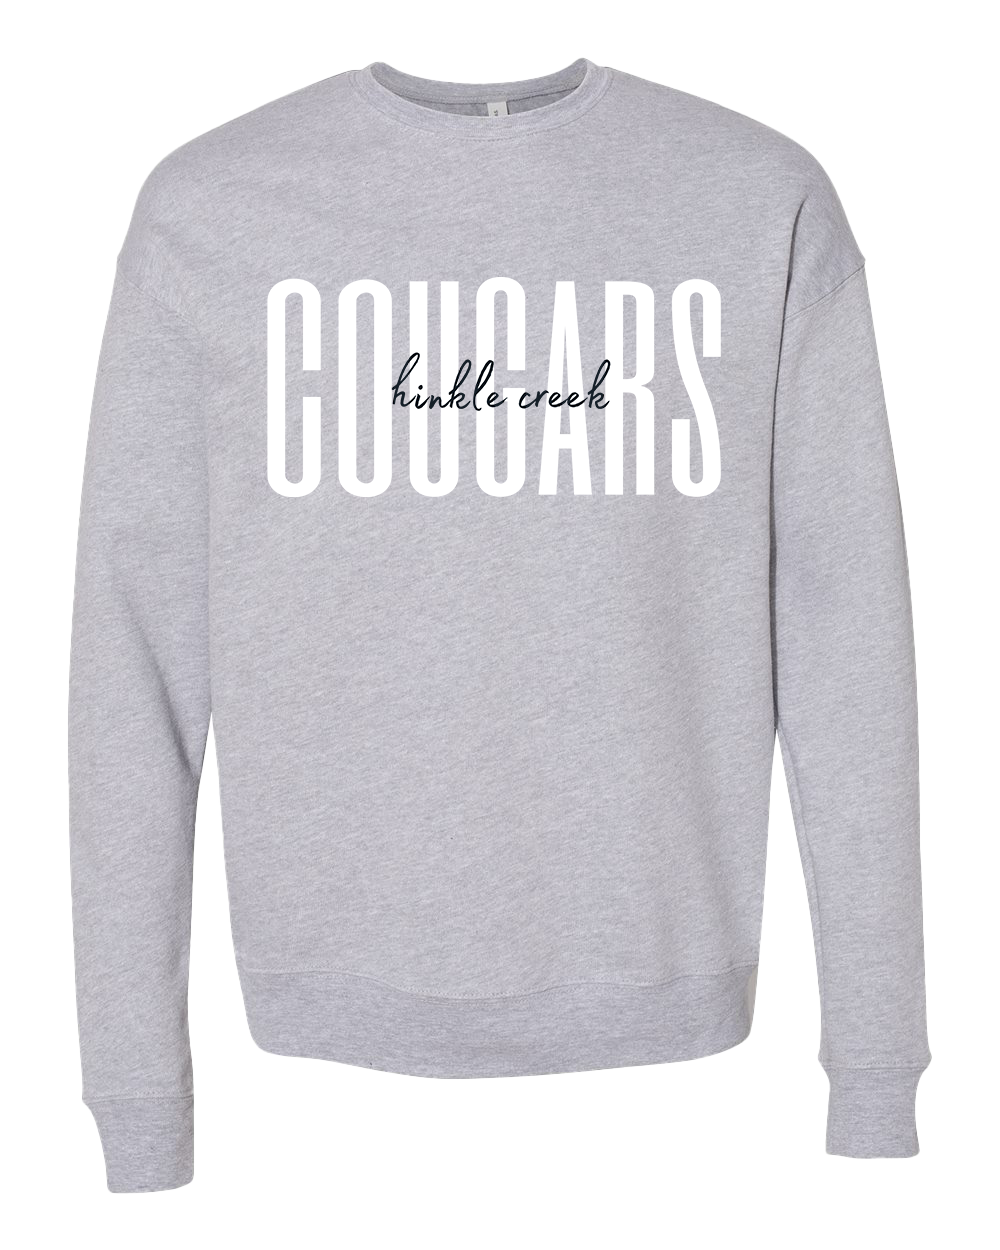 Hinkle Creek Cougars Tall Font Crew - Various Colors